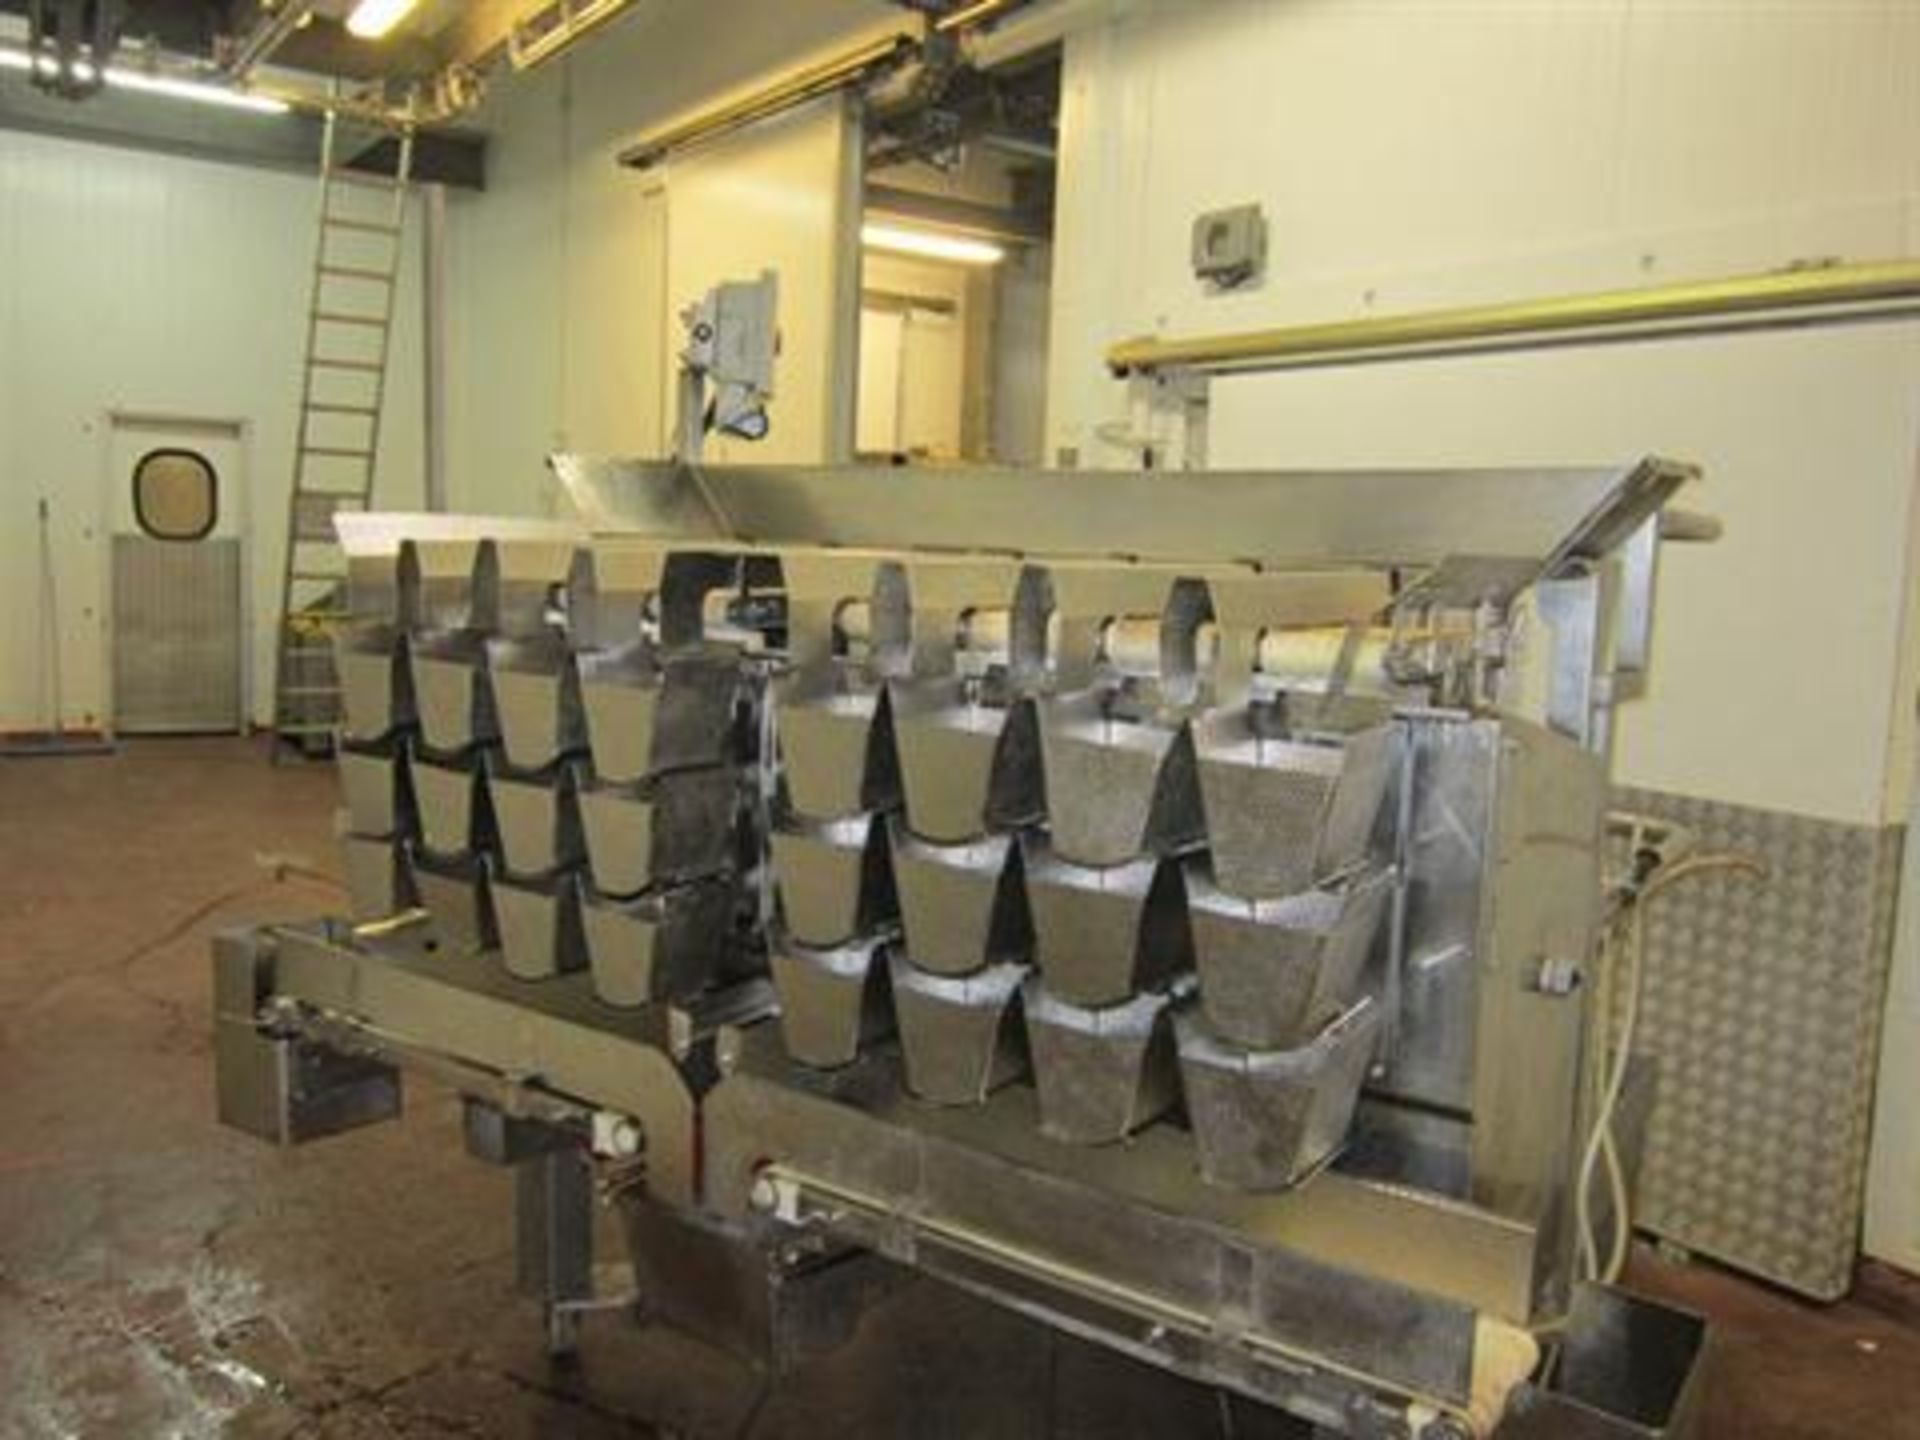 Ishida multi head 8 pan fresh food dimpled scale weigher model CCW-NZ-108B-S/20-WP-BE suited for 200